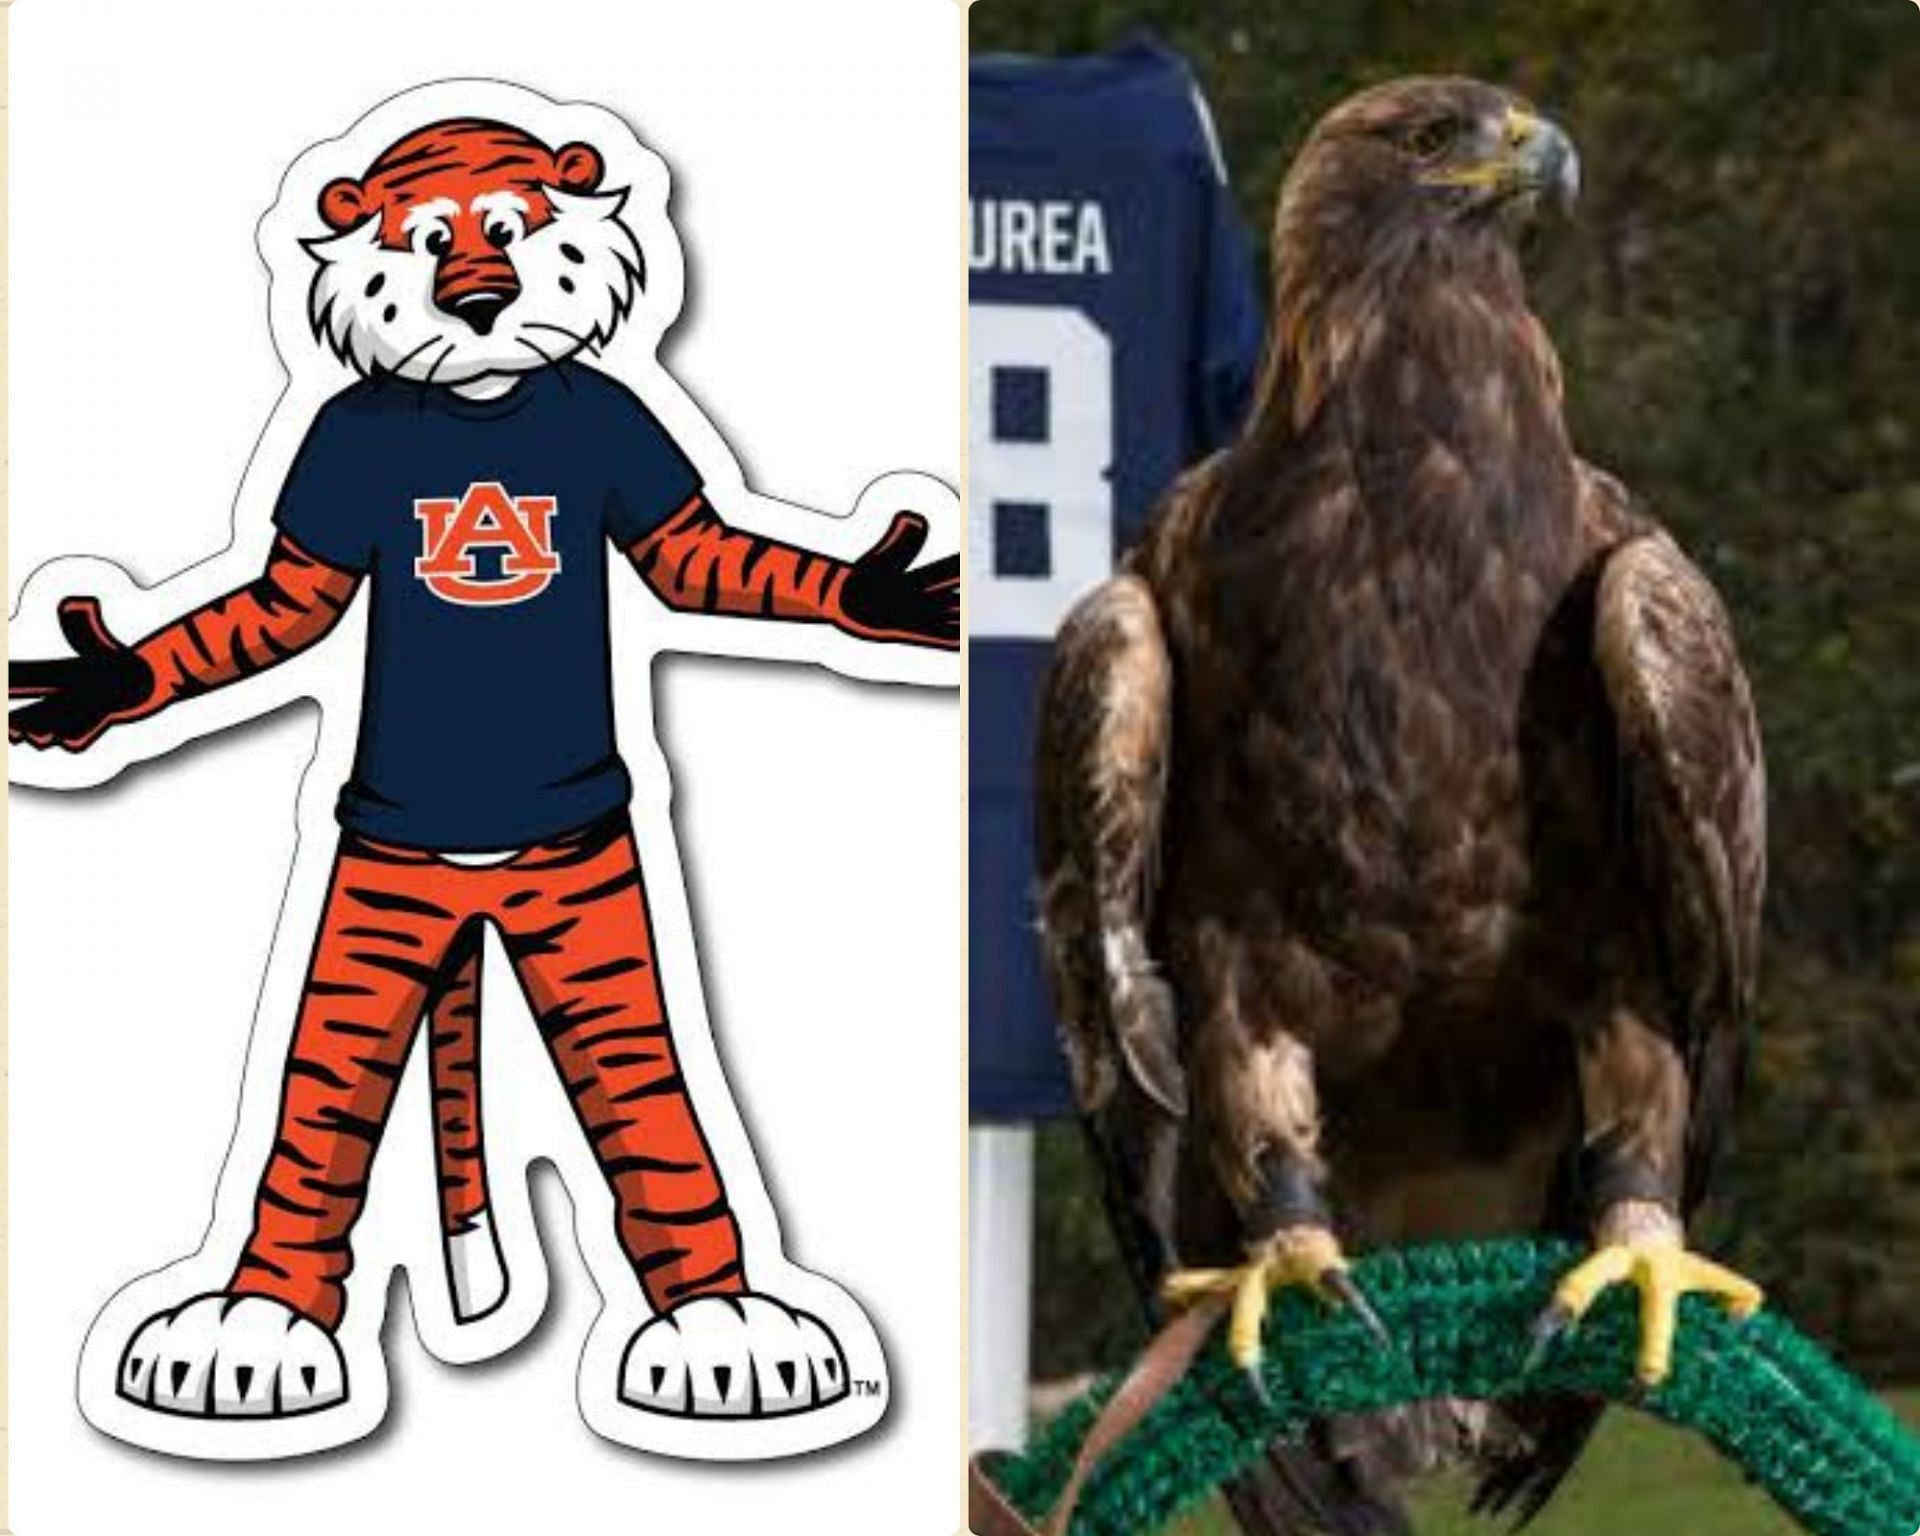 Why does Auburn have 2 mascots, War Eagle and Tiger?